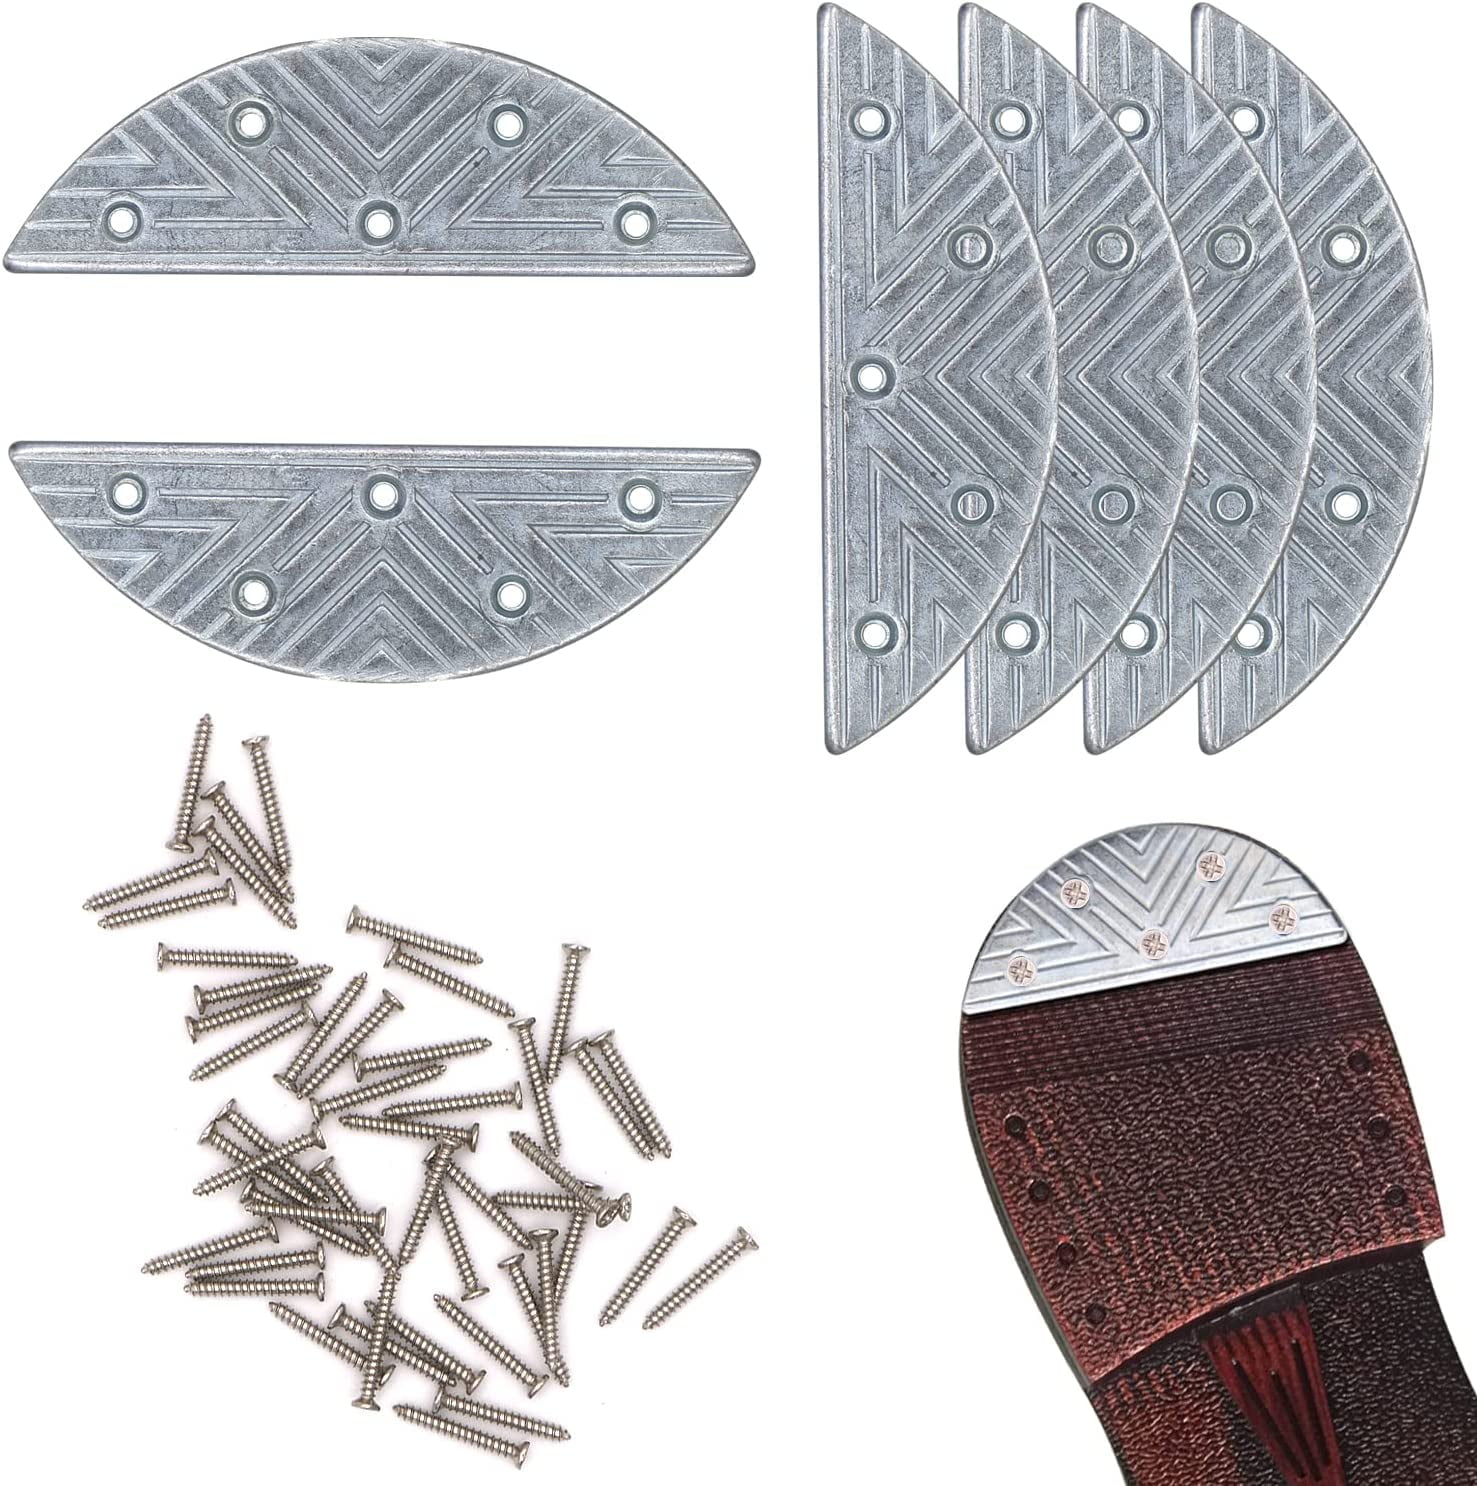  24 Pairs Shoe Repair Heel Plates Shoe Heel Tips Taps Sole with  3 Sizes Heel Repair Pad Heels Replacement with Nails Heel Plates for Shoes Shoe  Repair Kit : Health & Household